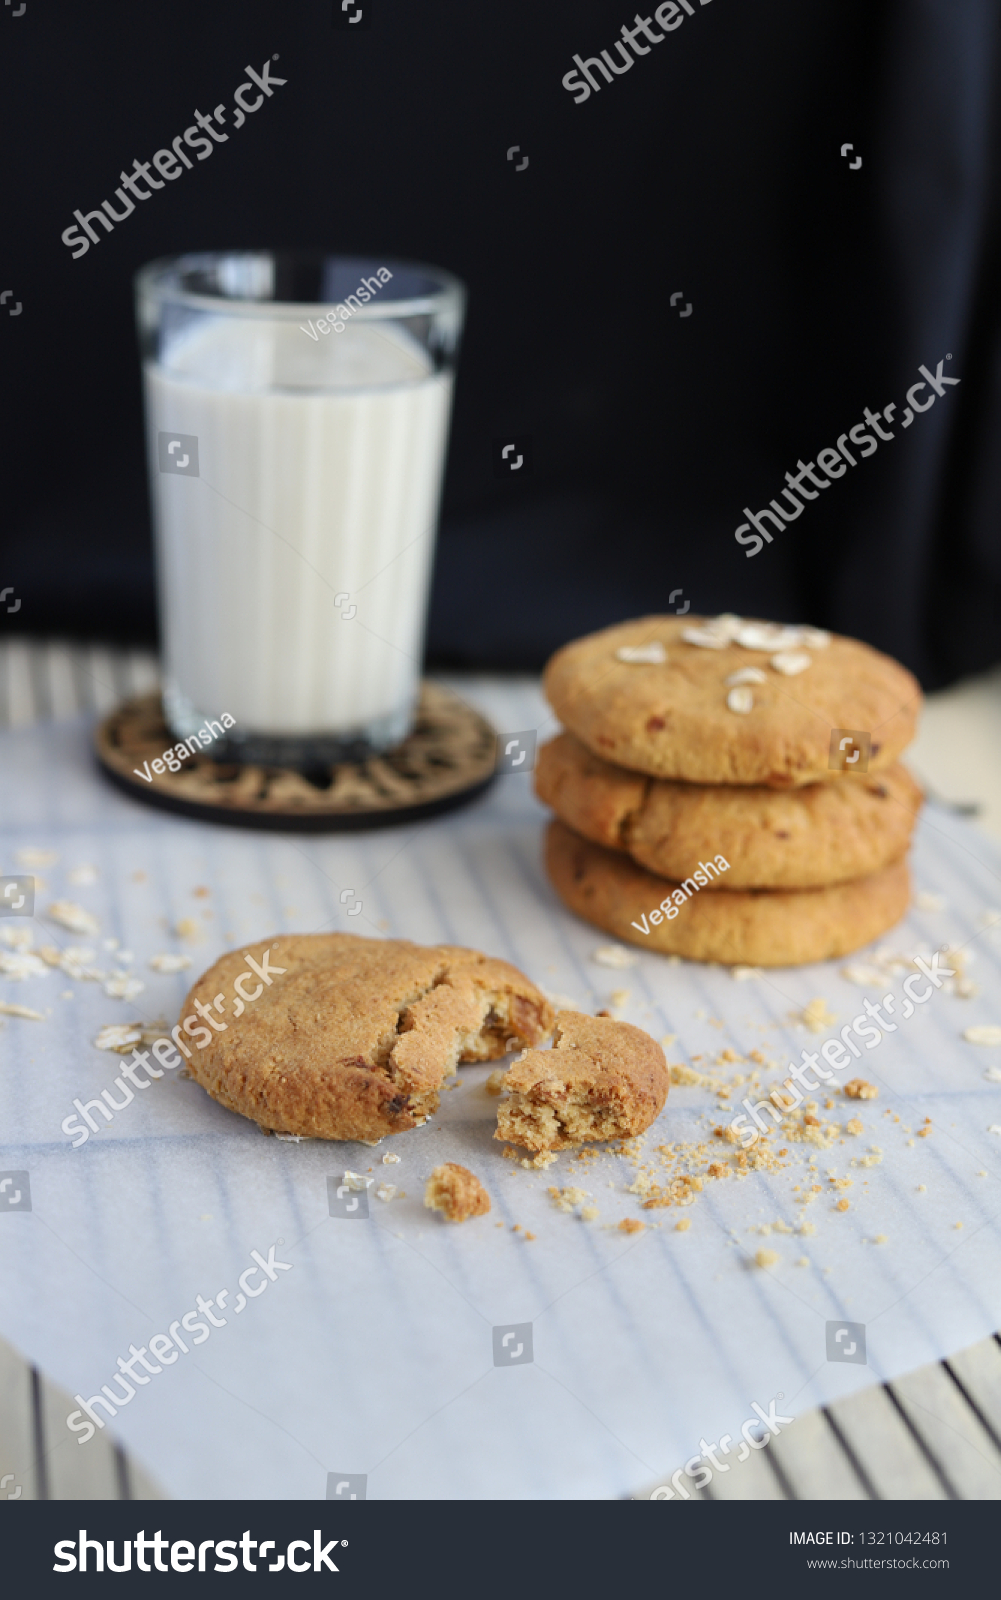 Vegan oat cookies with the glass of oat milk on the dark background #1321042481